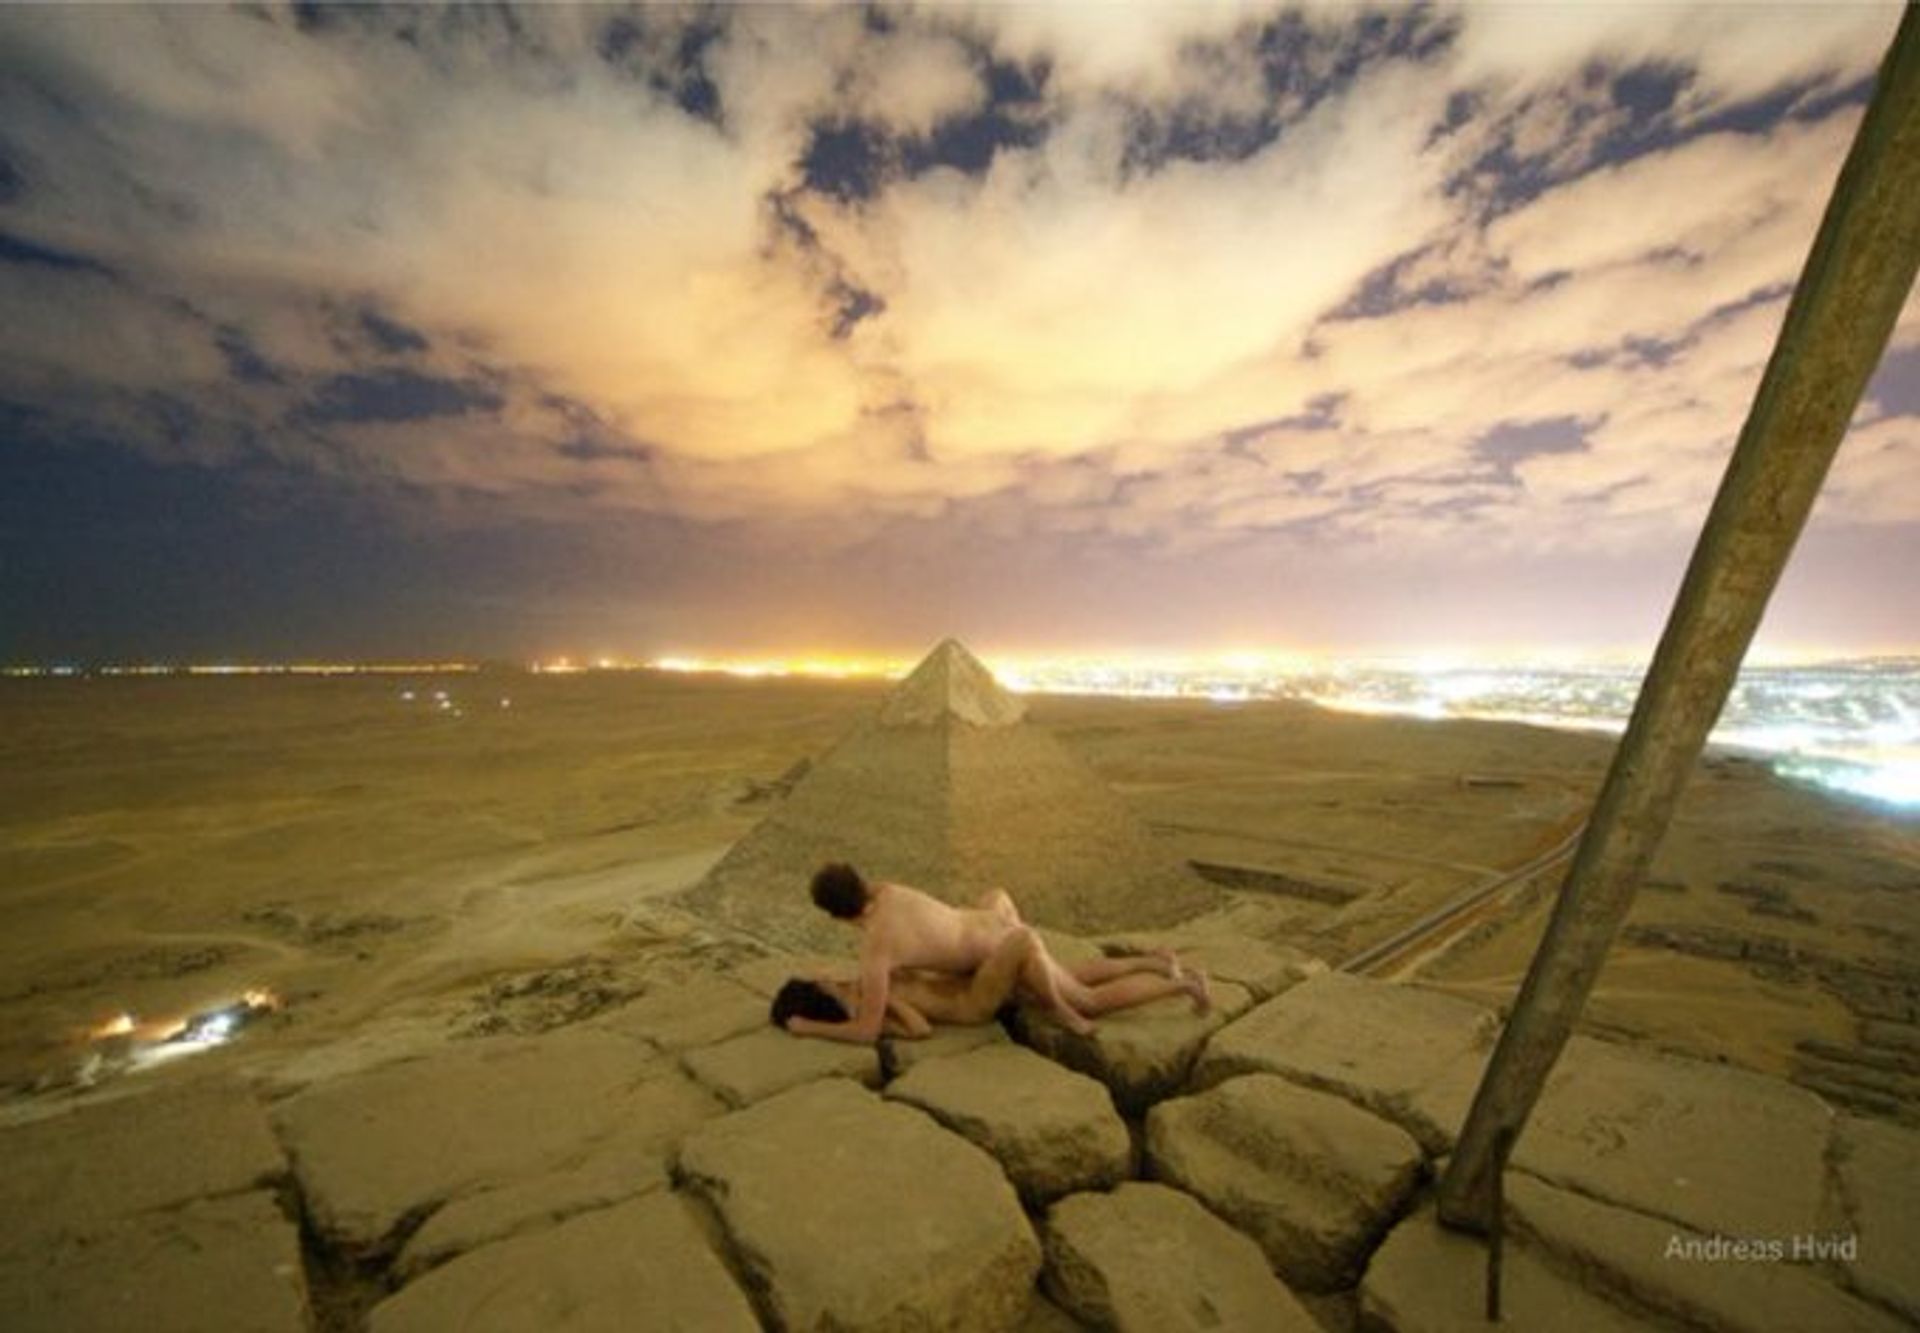 Andreas Hvid and an unidentified woman sparked outrage last year for photographing themselves naked on top of the Great Pyramid of Giza 